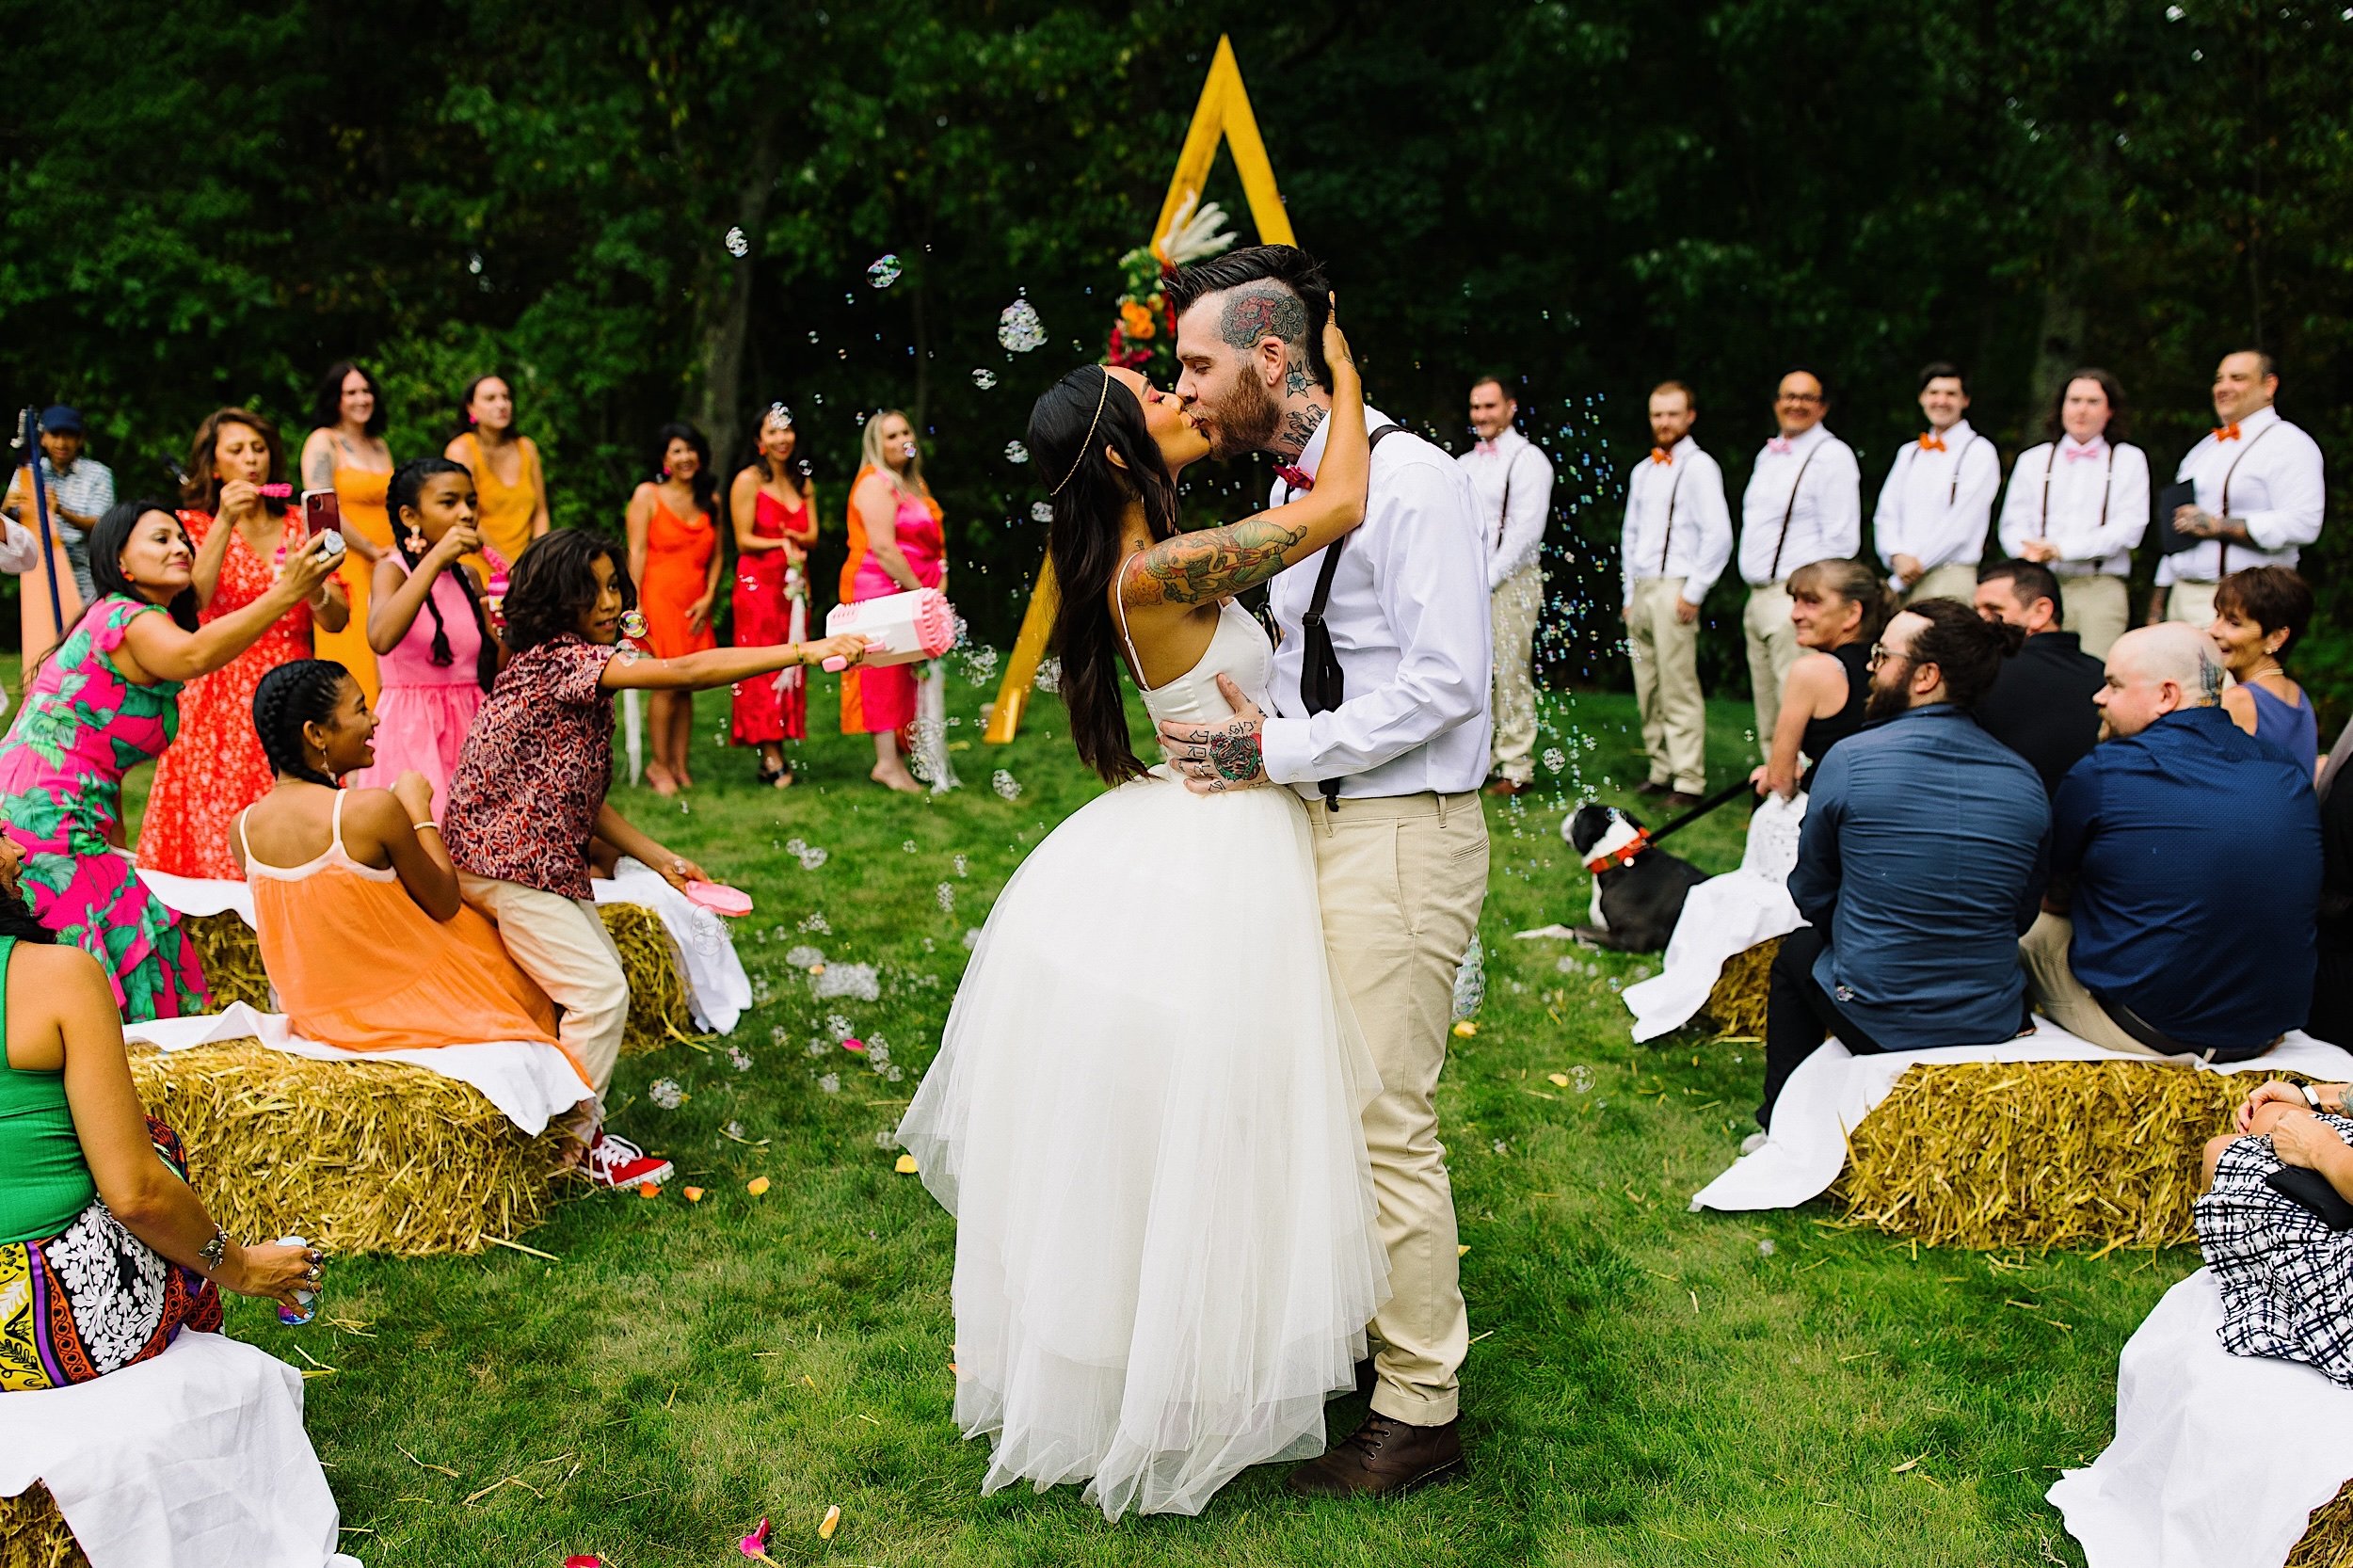 058-ZacWolfPhotography-20220813-Blog_Bride-and-Groom-kissing-at-wedding-ceremony.jpg